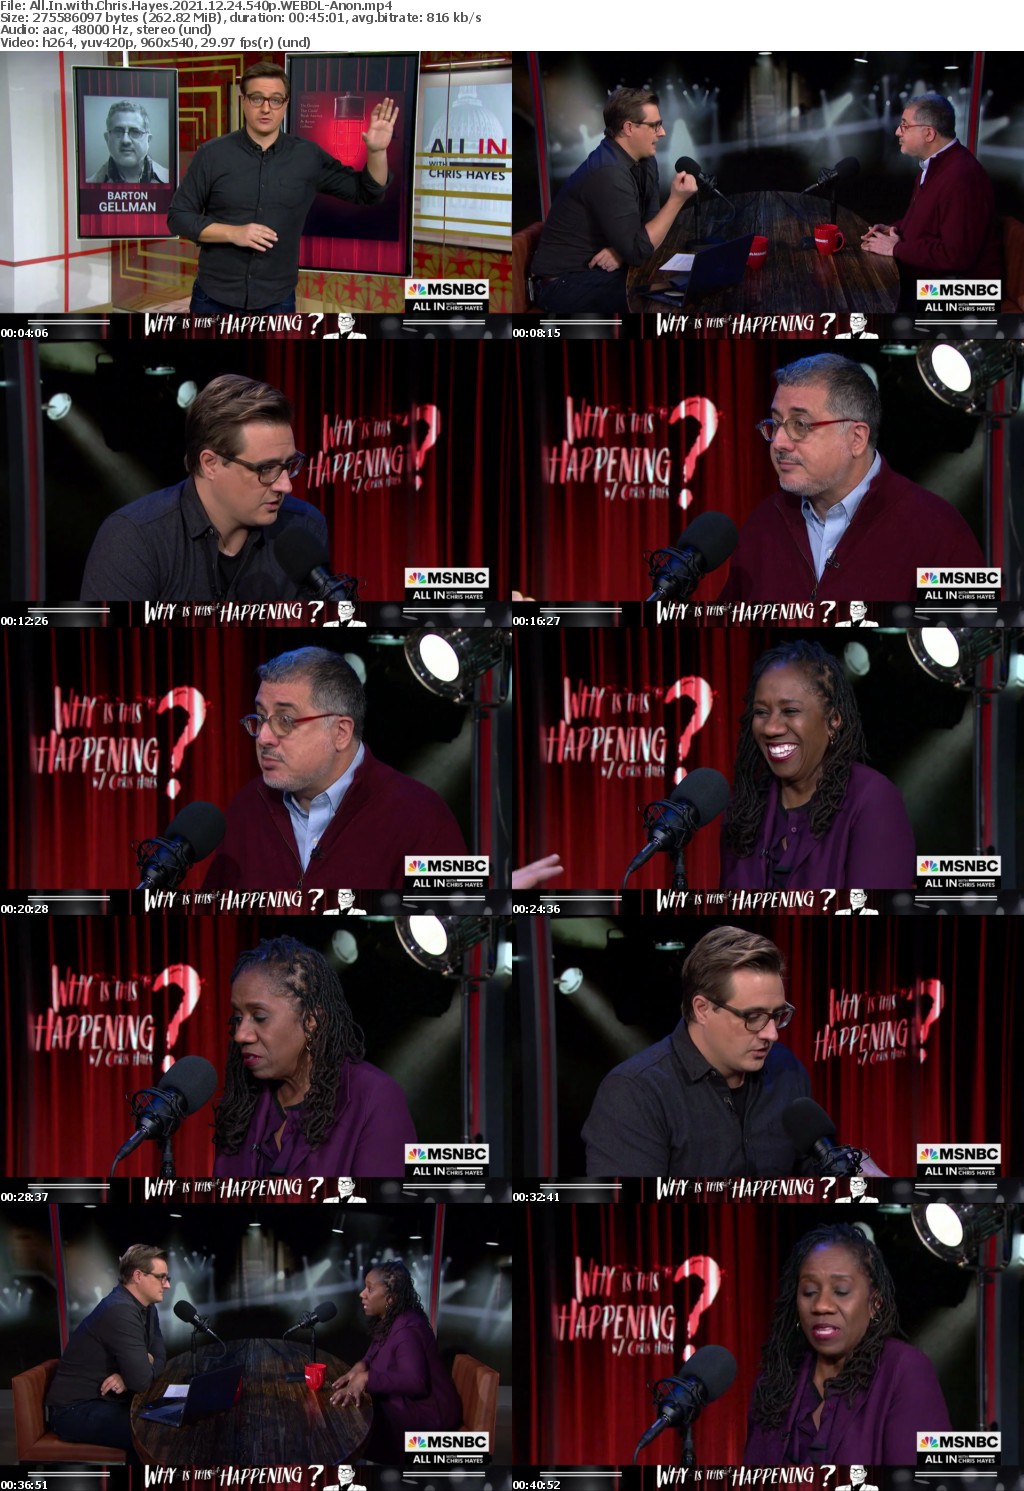 All In with Chris Hayes 2021 12 24 540p WEBDL-Anon